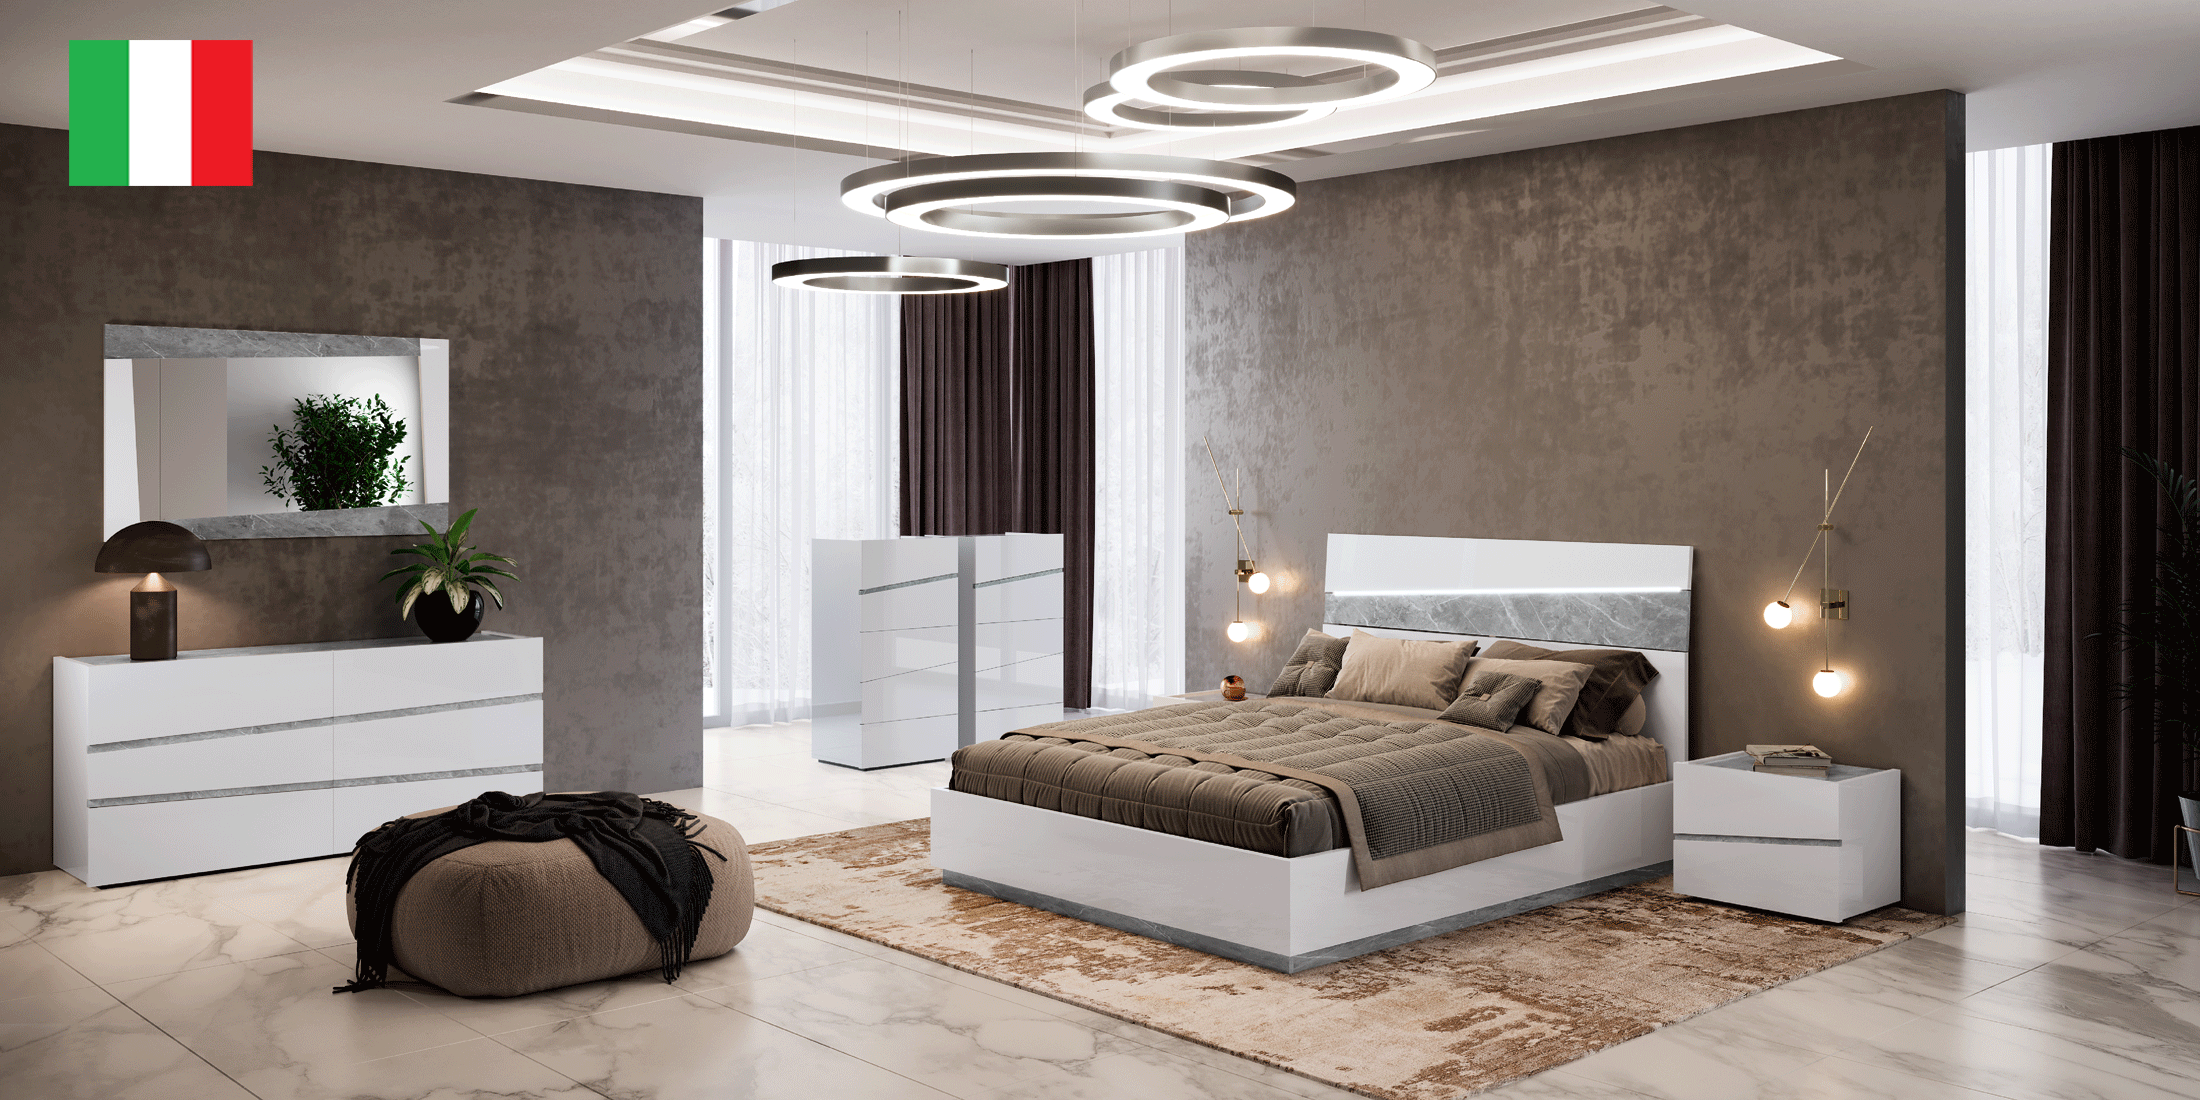 Brands Camel Gold Collection, Italy Alba Bedroom w/ Light by Camelgroup – Italy